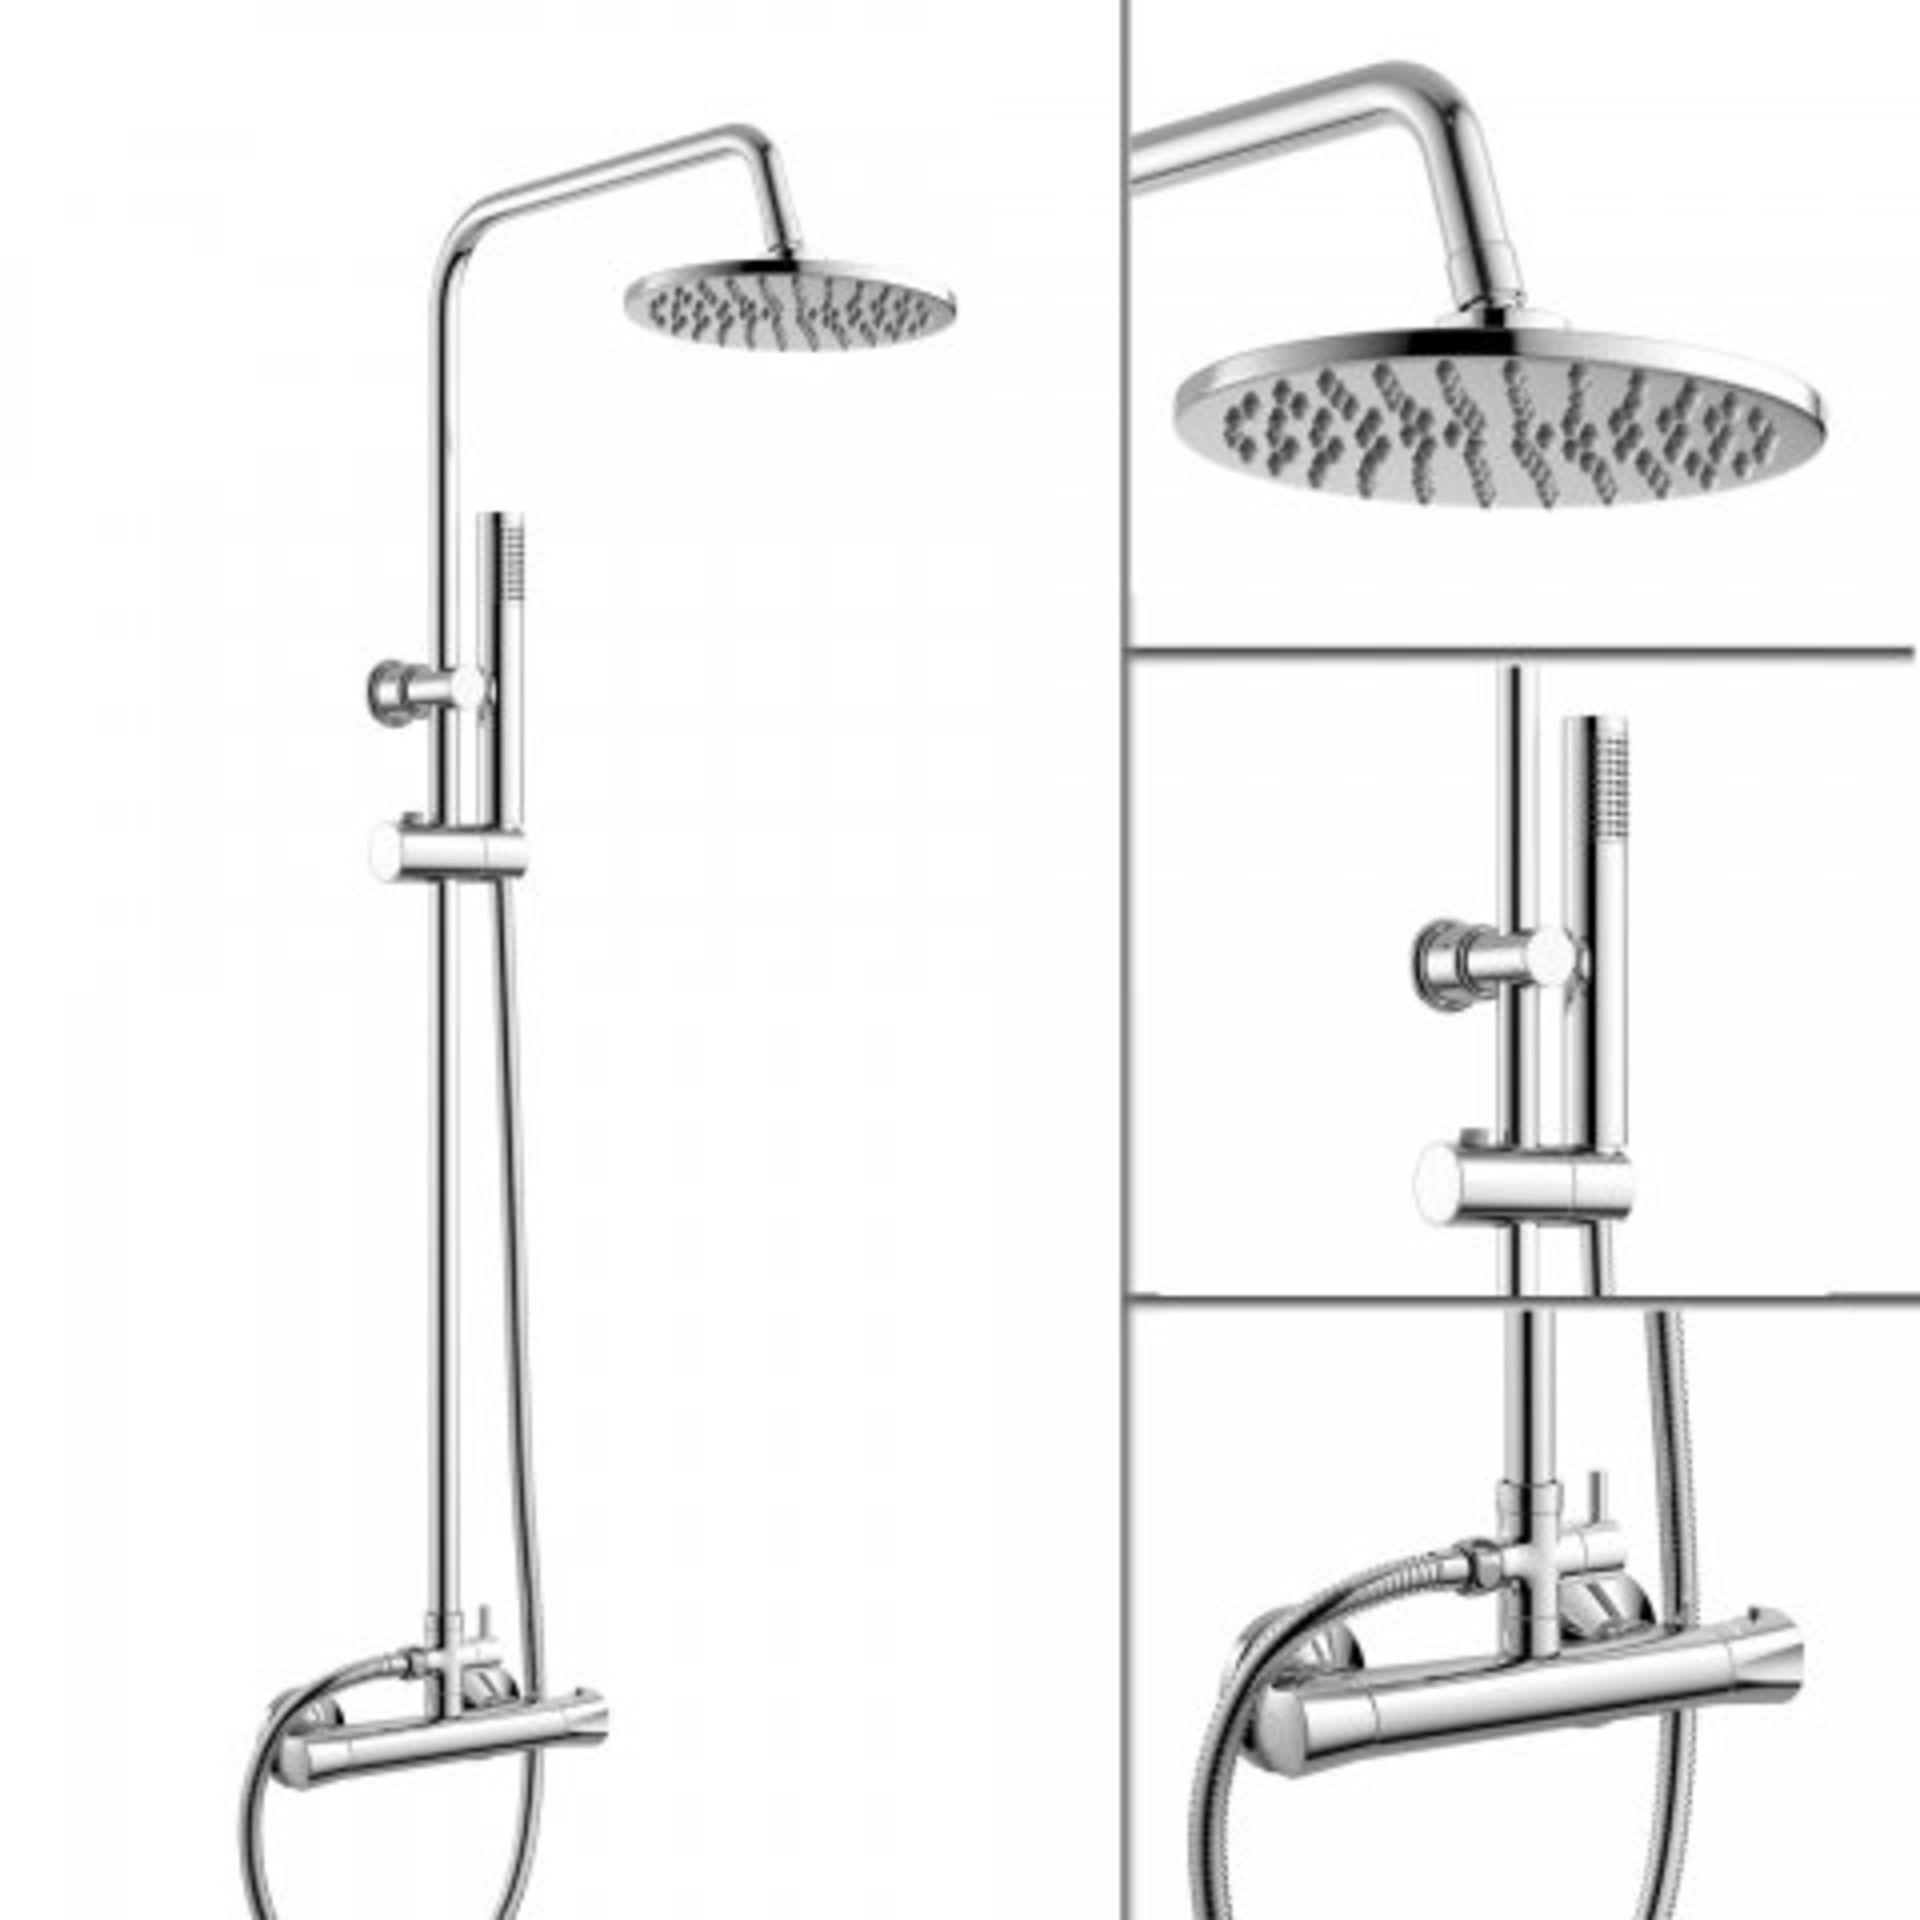 (N16) 200mm Round Head Thermostatic Exposed Shower Kit & Hand Held. RRP £299.99. Simplistic Style - Image 2 of 5